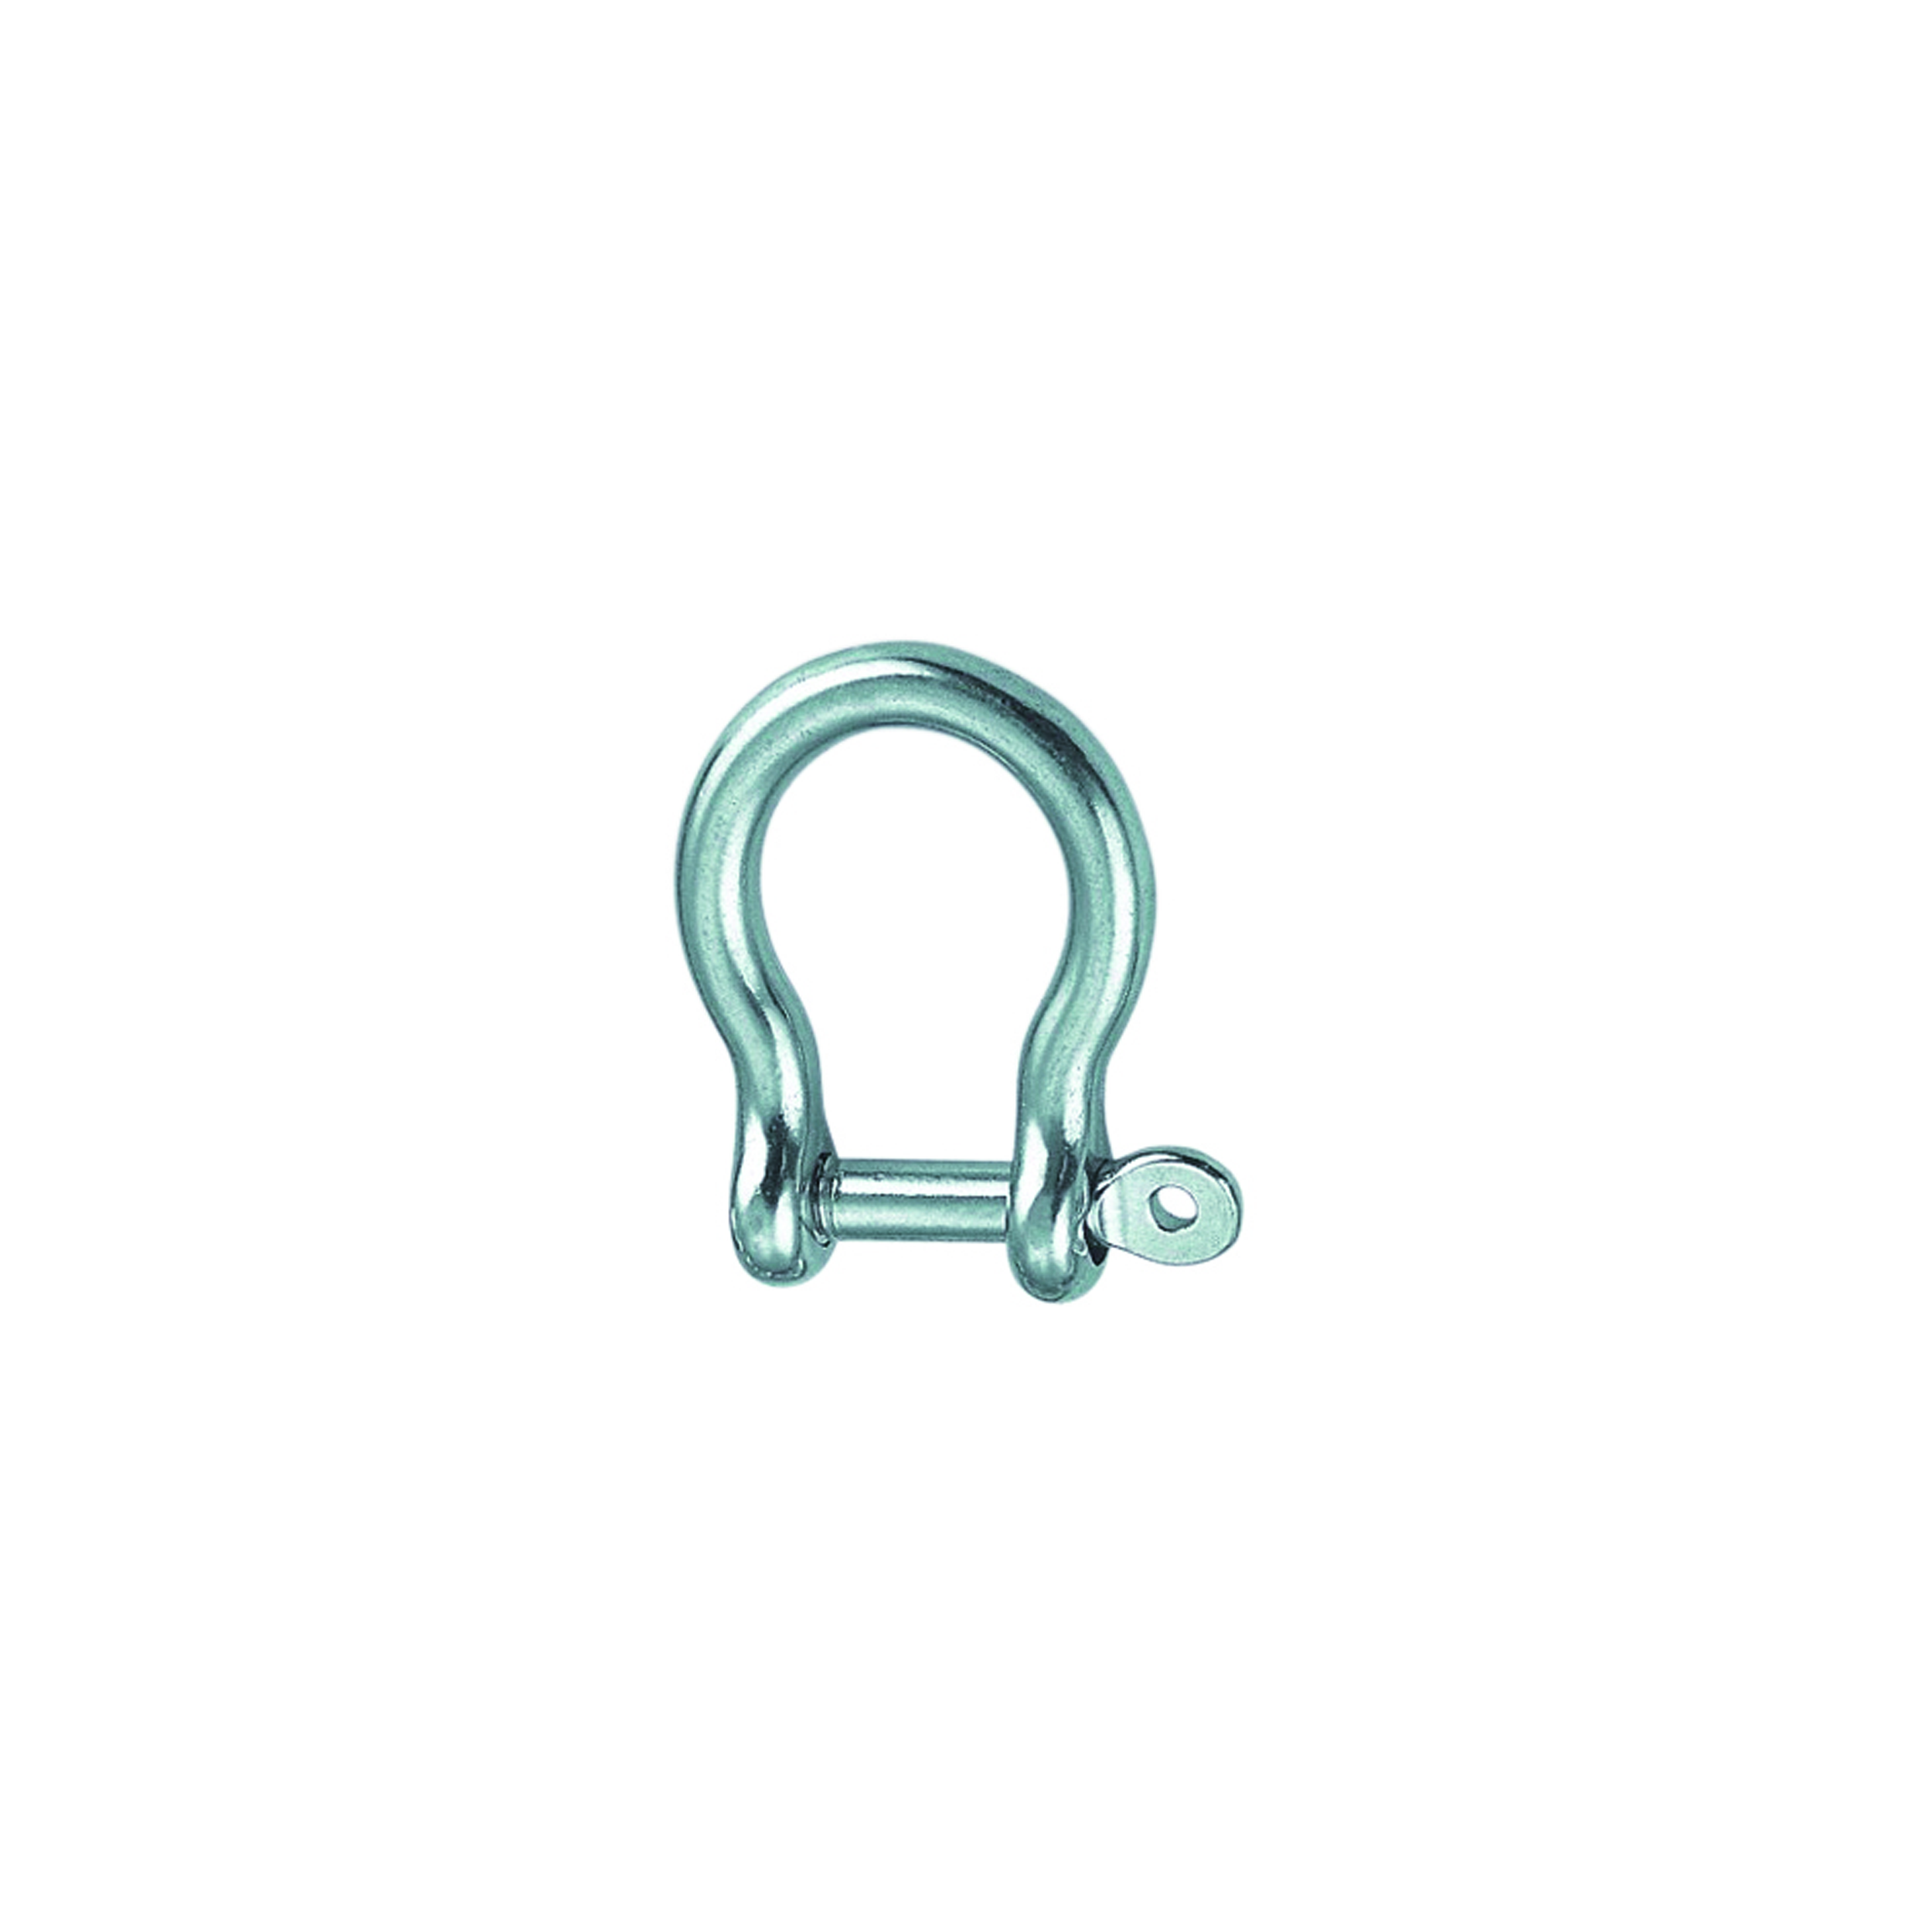 10 STCK / PCS. Bow shackle with captive pin A4  6mm